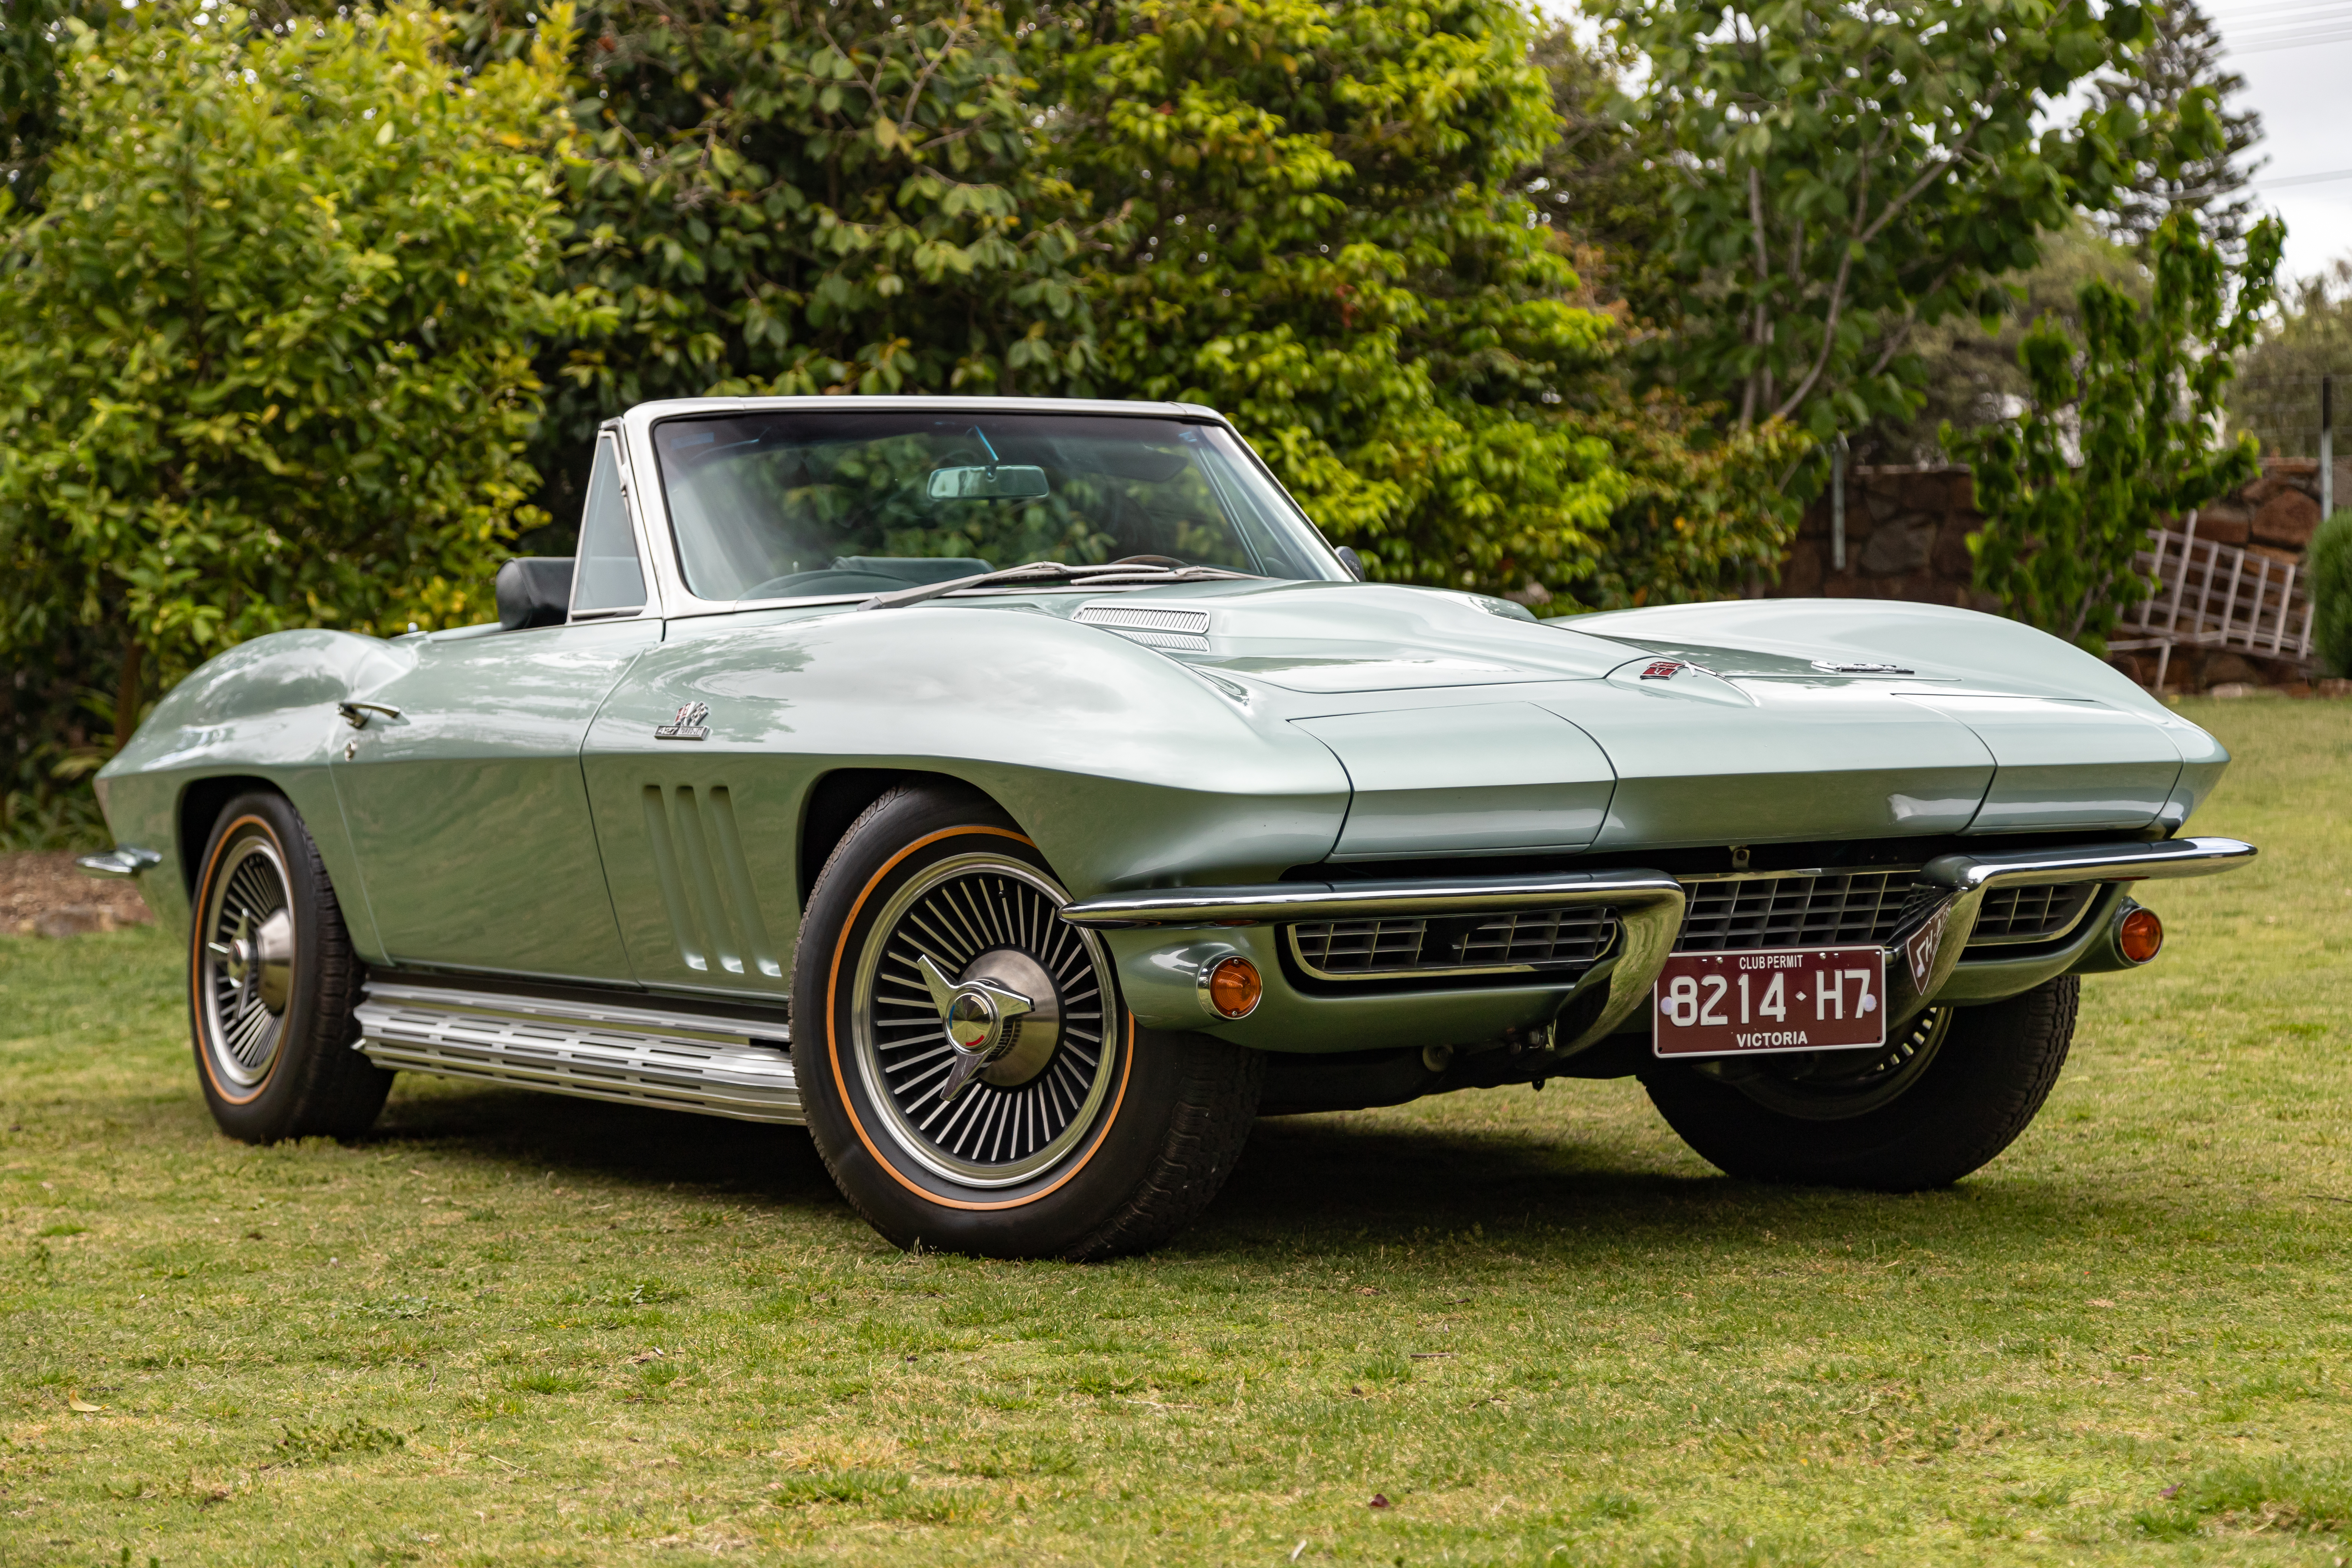 1966 Chevrolet Corvette Sting Ray (C2) Convertible for sale by